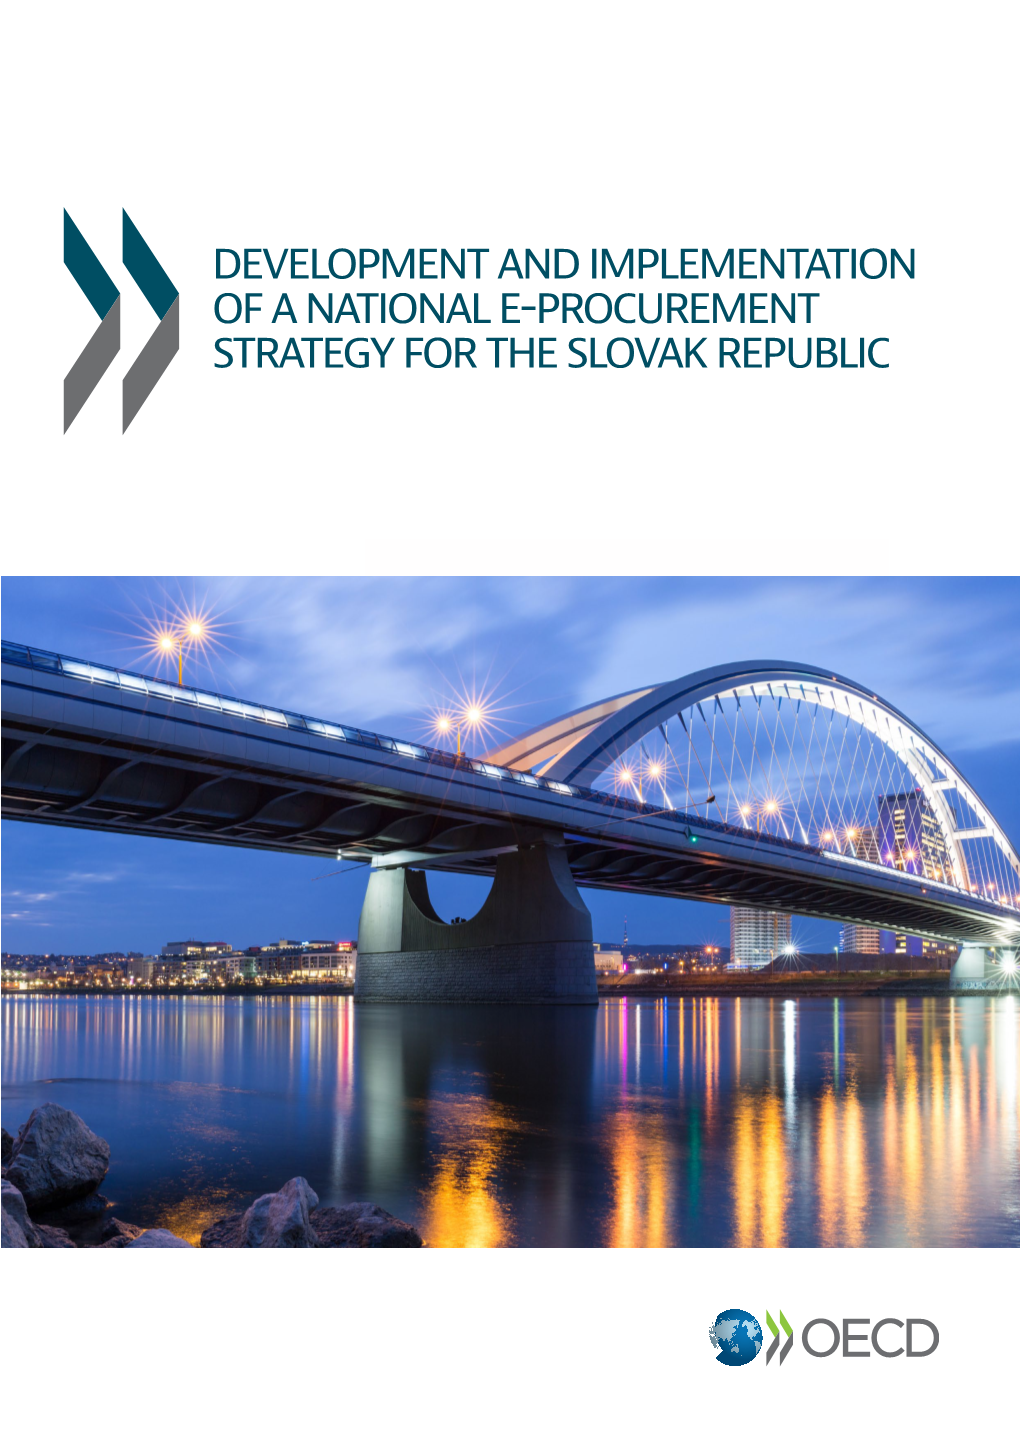 Development and Implementation of a National E-Procurement Strategy for the SLOVAK REPUBLIC